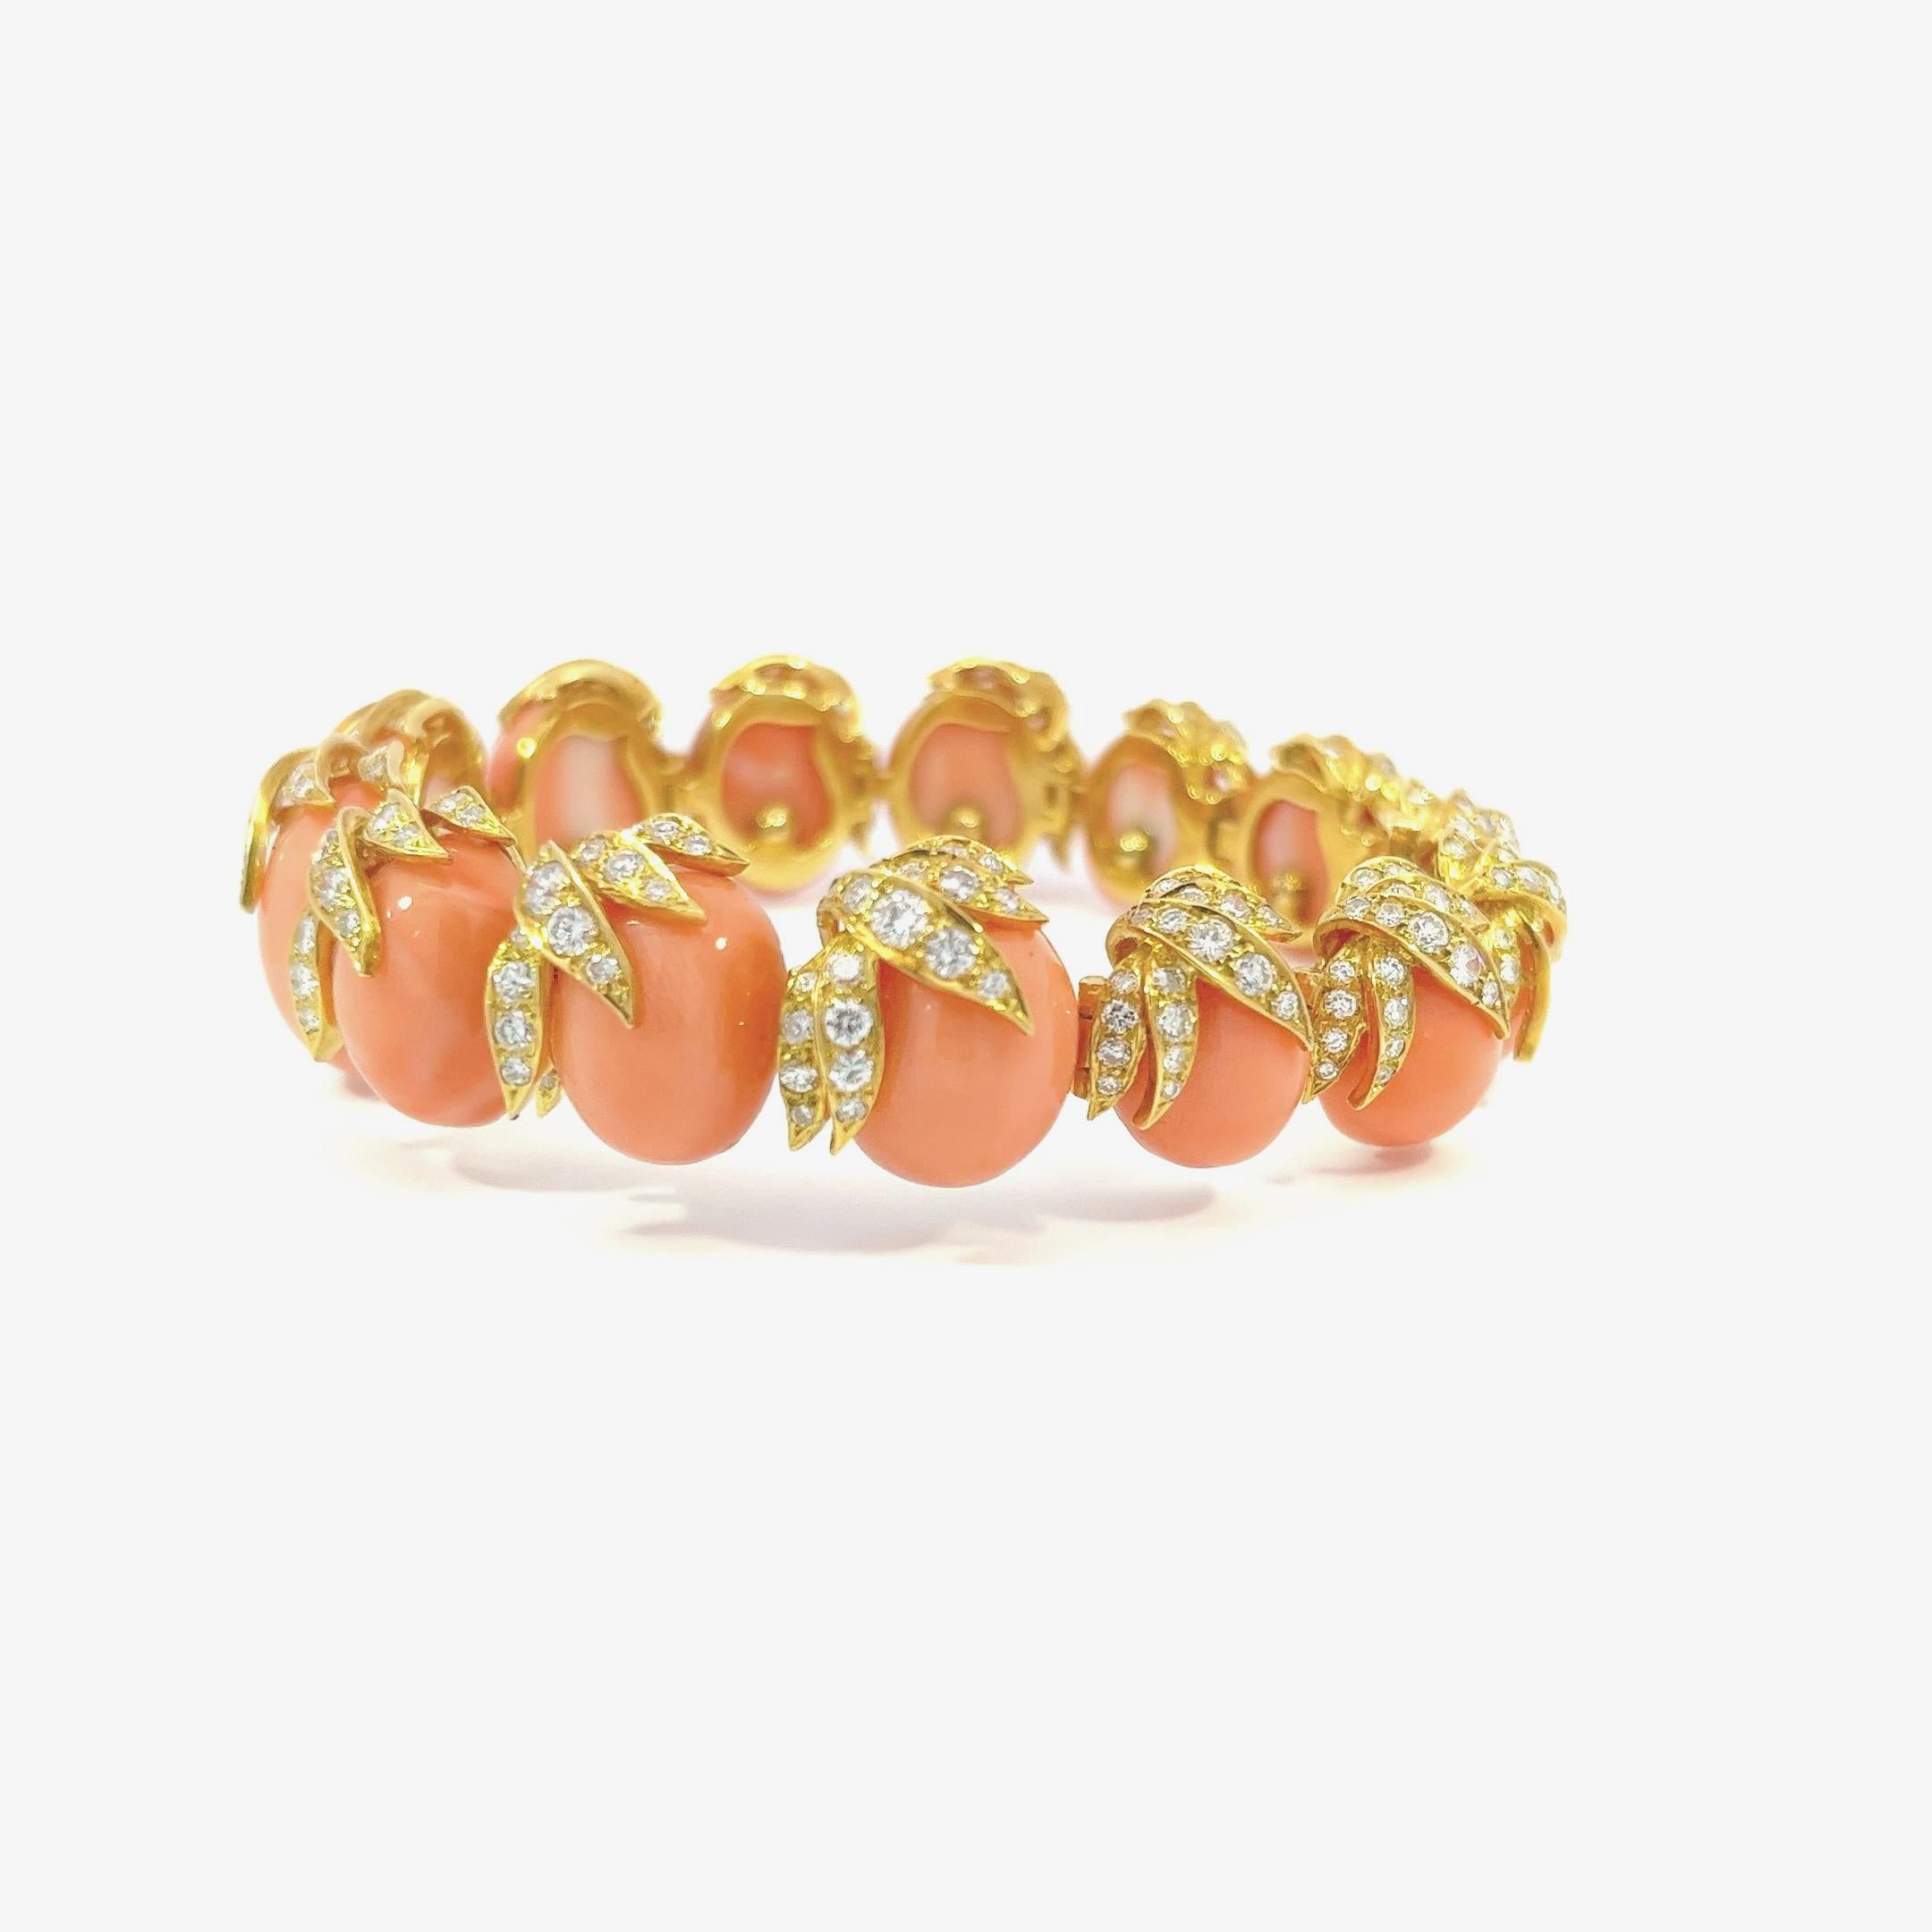 Natural angel skin coral bracelet accented with E color VS clarity diamonds. 

Most coral pieces in the industry need treatments such as bleaching, dyeing, or impregnation to be used as gems. This beautifully handcrafted bracelet required no dye to